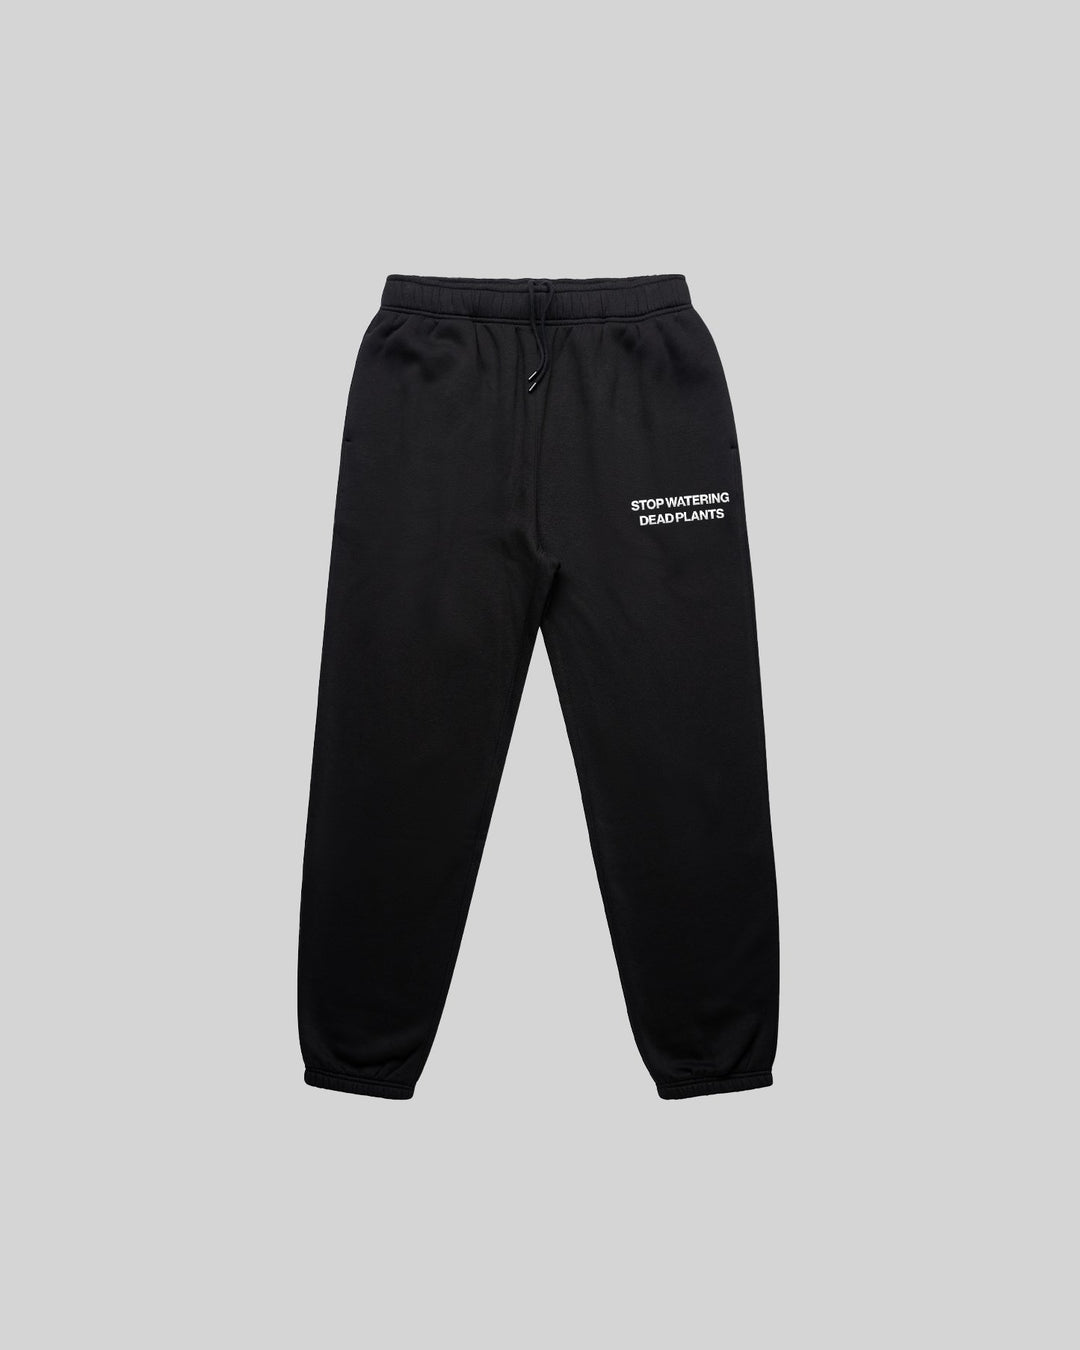 Stop Watering Dead Plants 2.0 Relaxed Sweatpants - trainofthoughtcollective